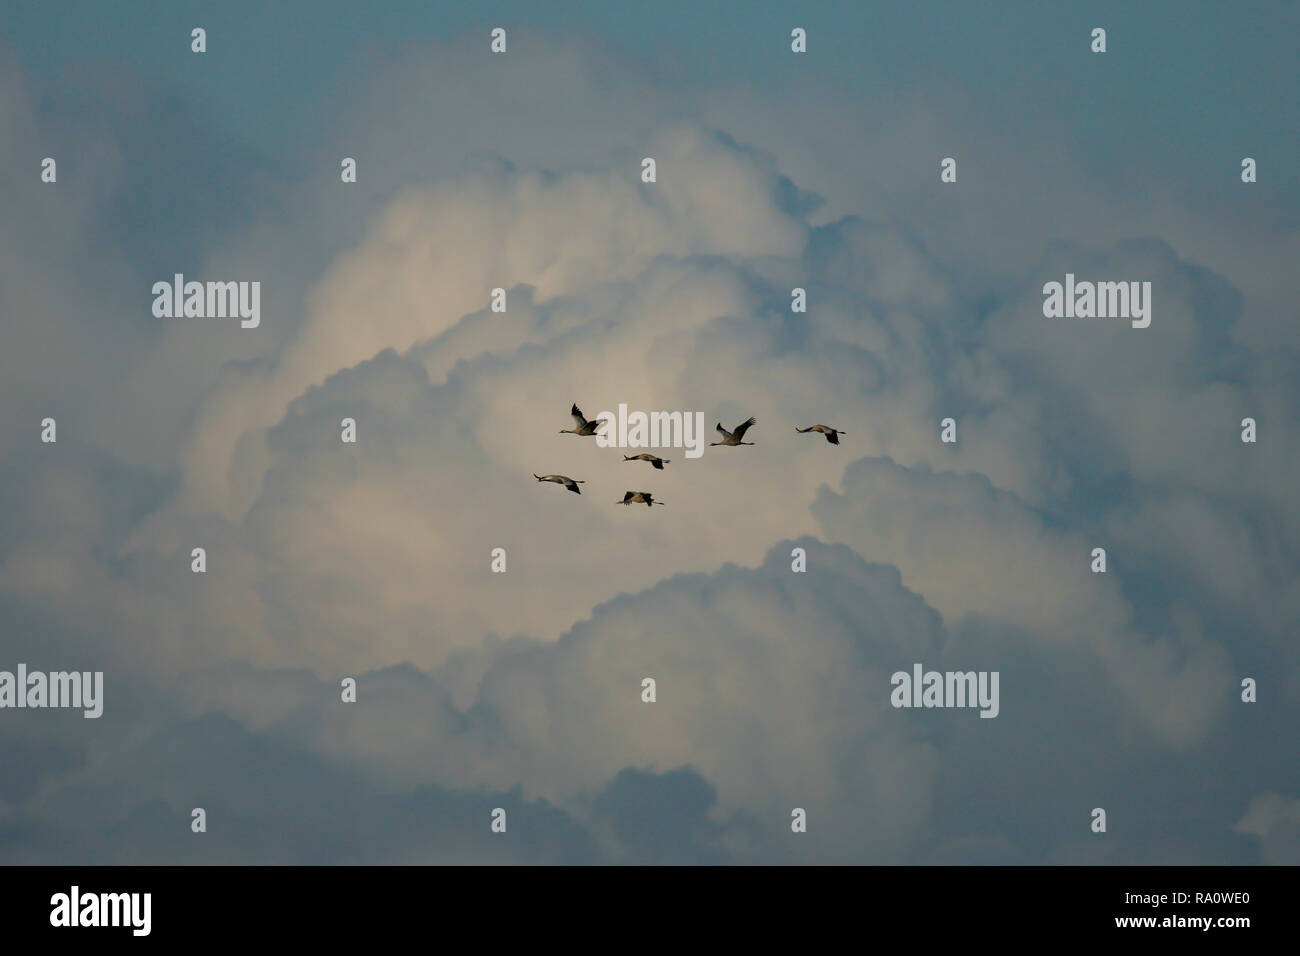 Common Cranes (Grus grus) flying in front of massive cumulus cloud formation, Island Ruegen, Baltic Sea, Mecklenburg-Western Pomerania, Germany Stock Photo